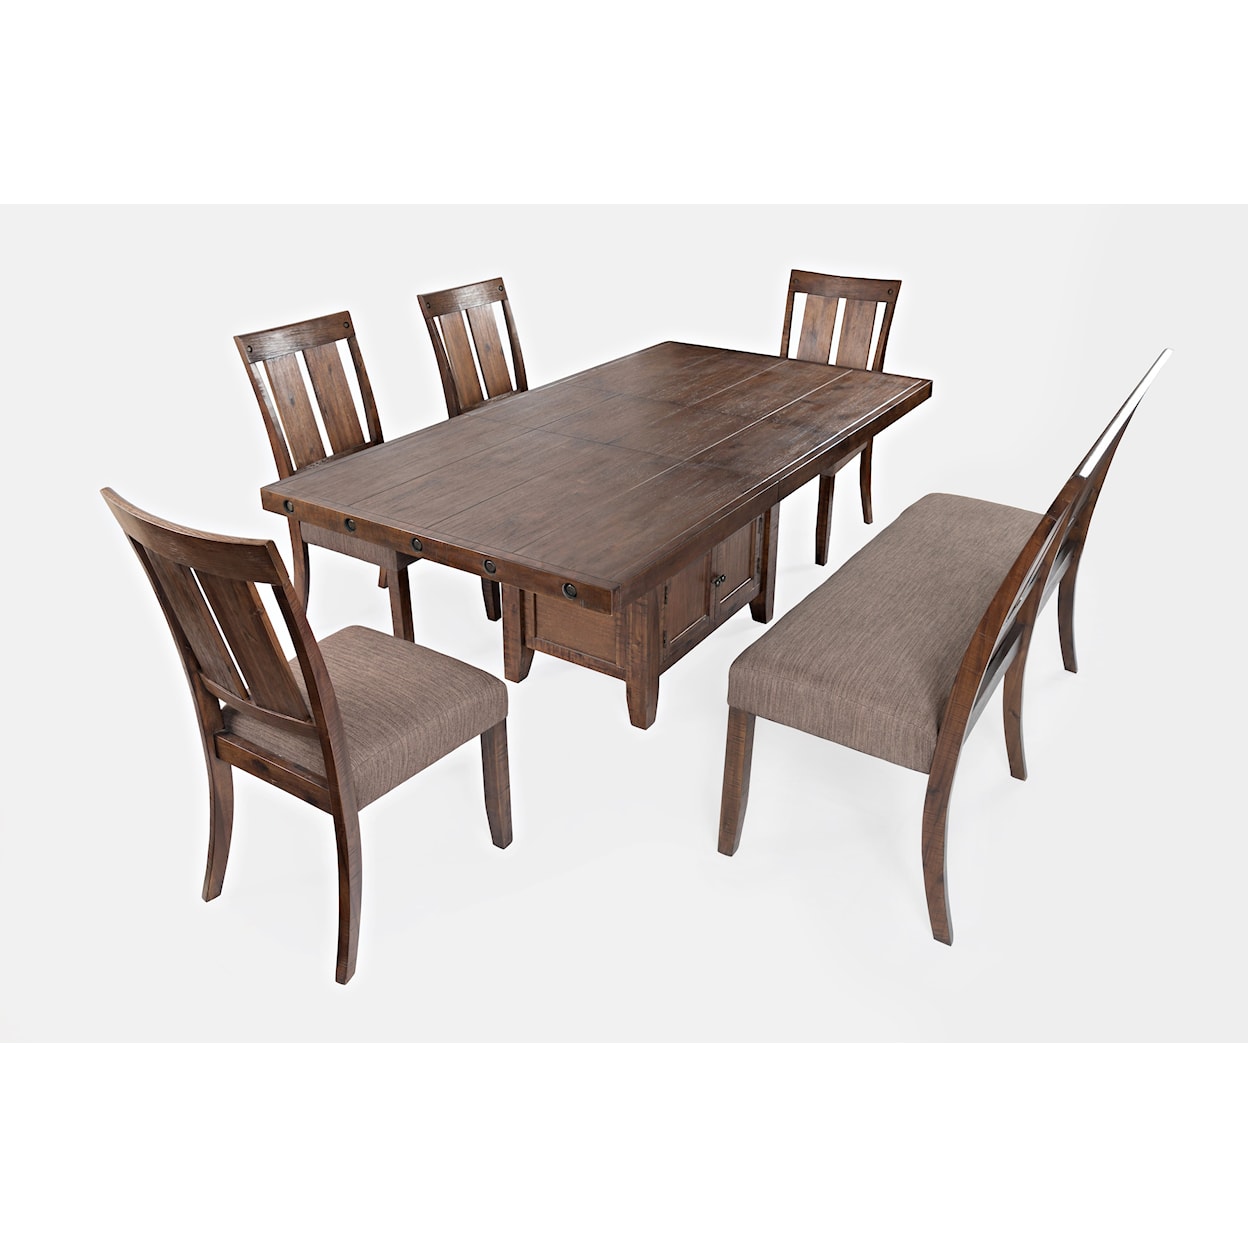 Jofran Mission Viejo Table and Chair Set with Bench